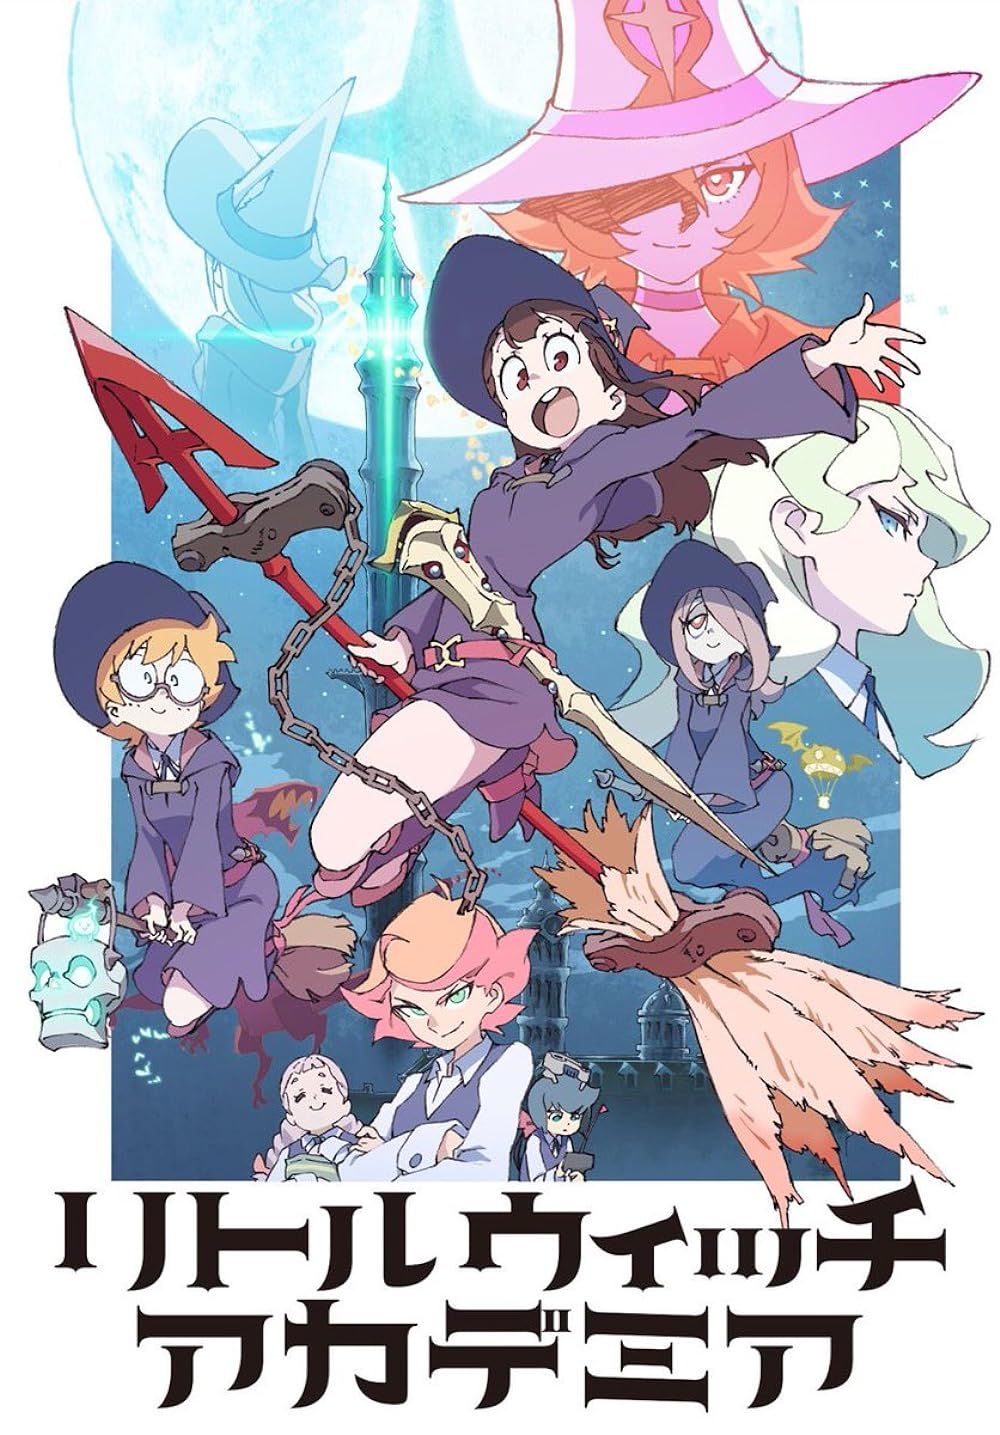 Little Witch Academia (2017) anime series official poster 